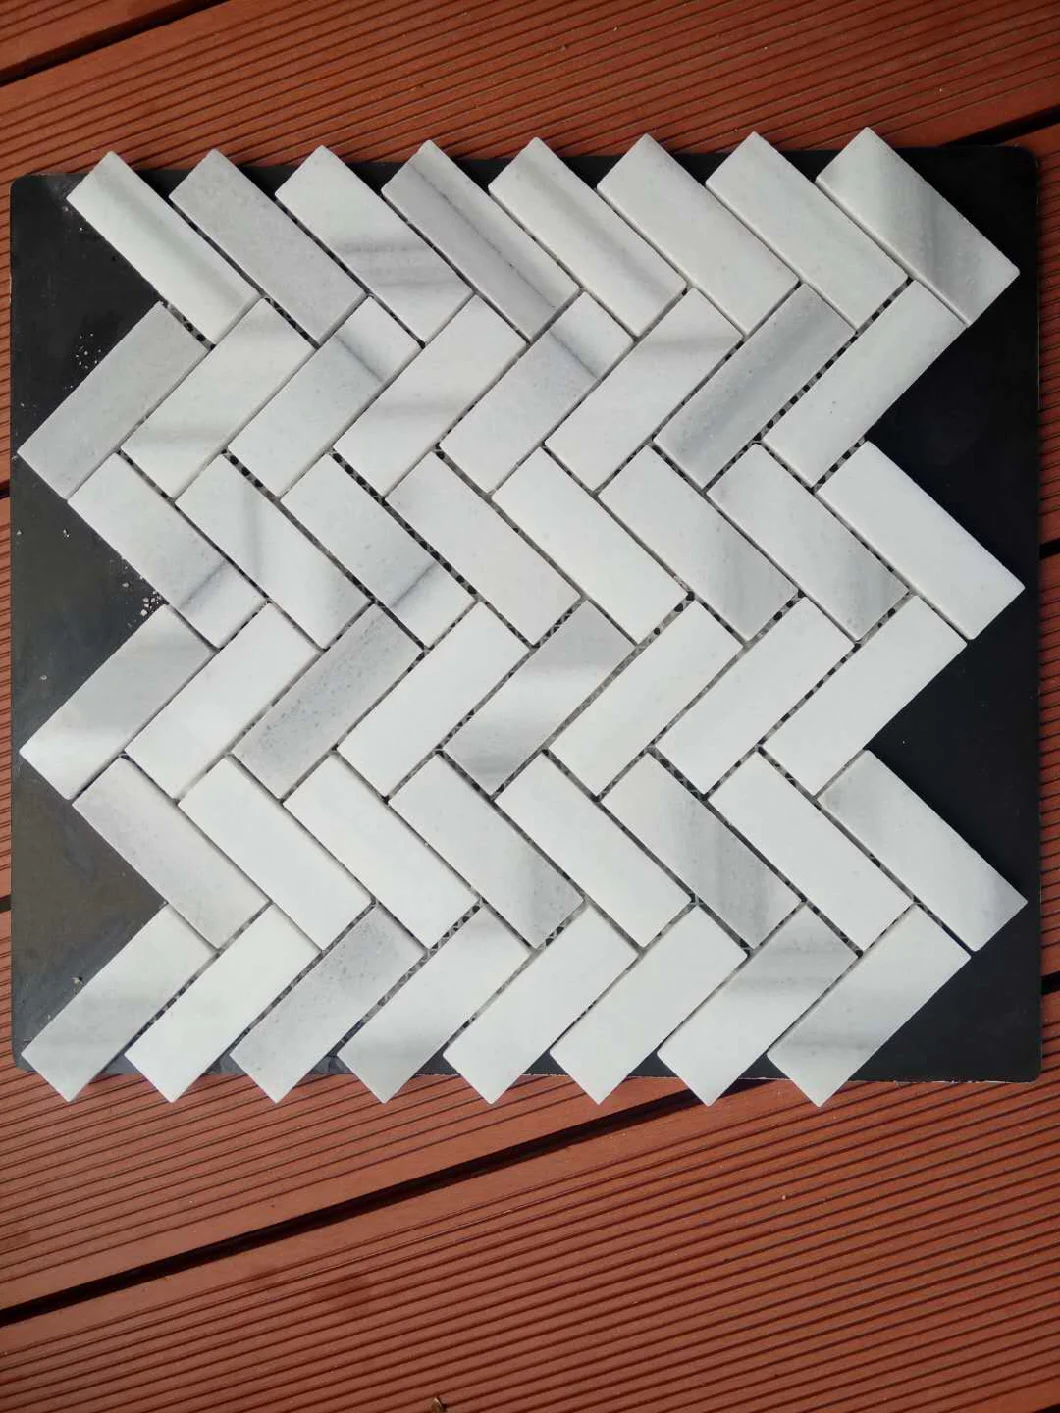 Popular and Cheap Marble Material Mosaic Tile Used for Floorings and Walls